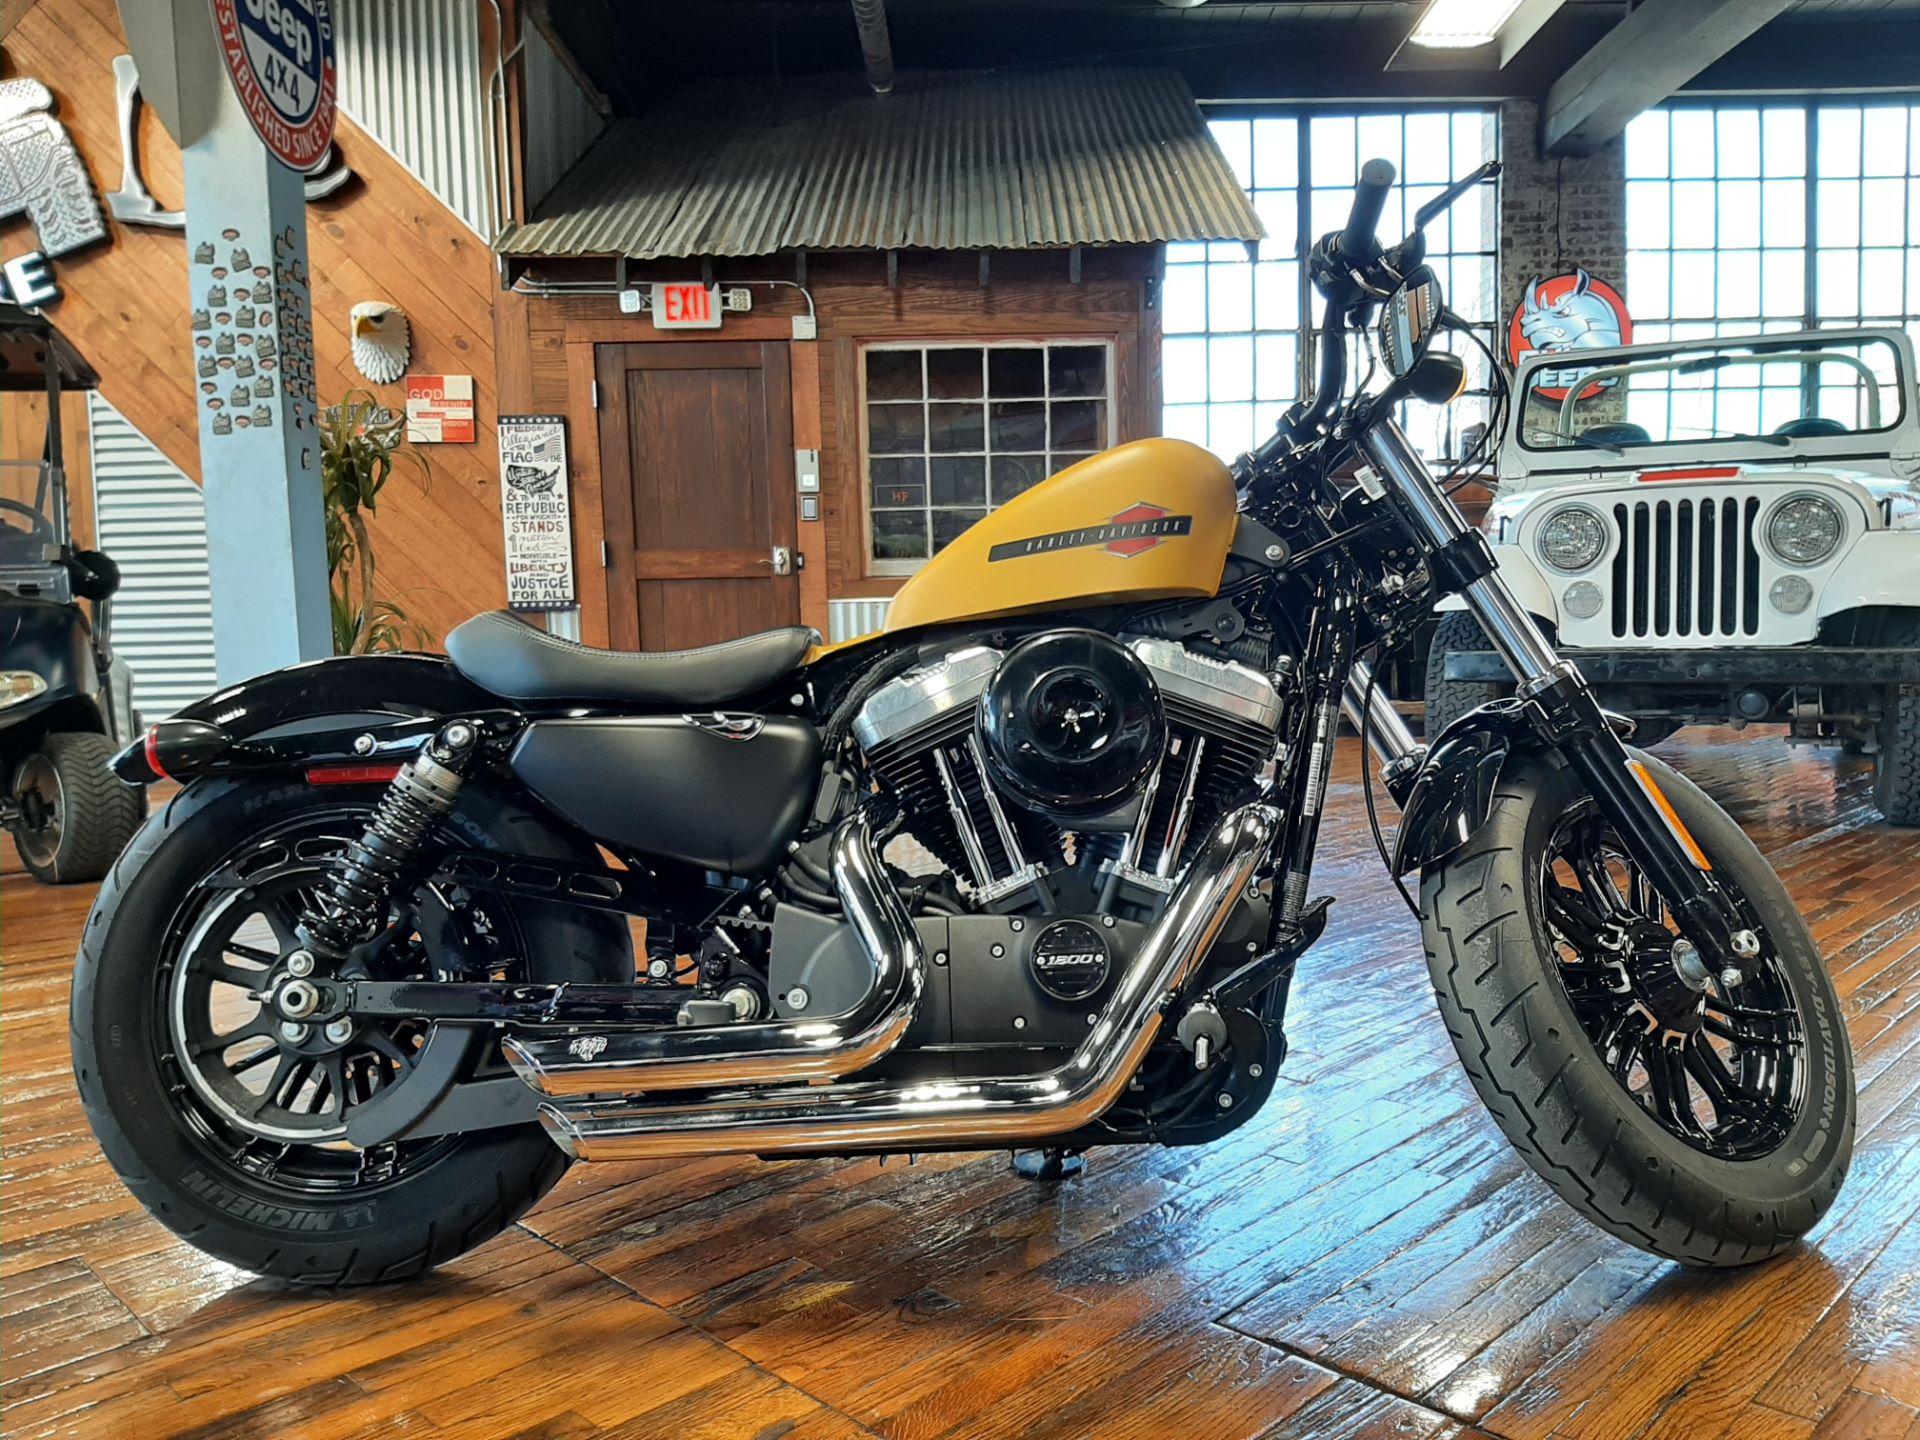 Used 2019 Harley Davidson Forty Eight Motorcycles In Laurel Ms Ms Lul 0751 4301 Rugged Gold Denim